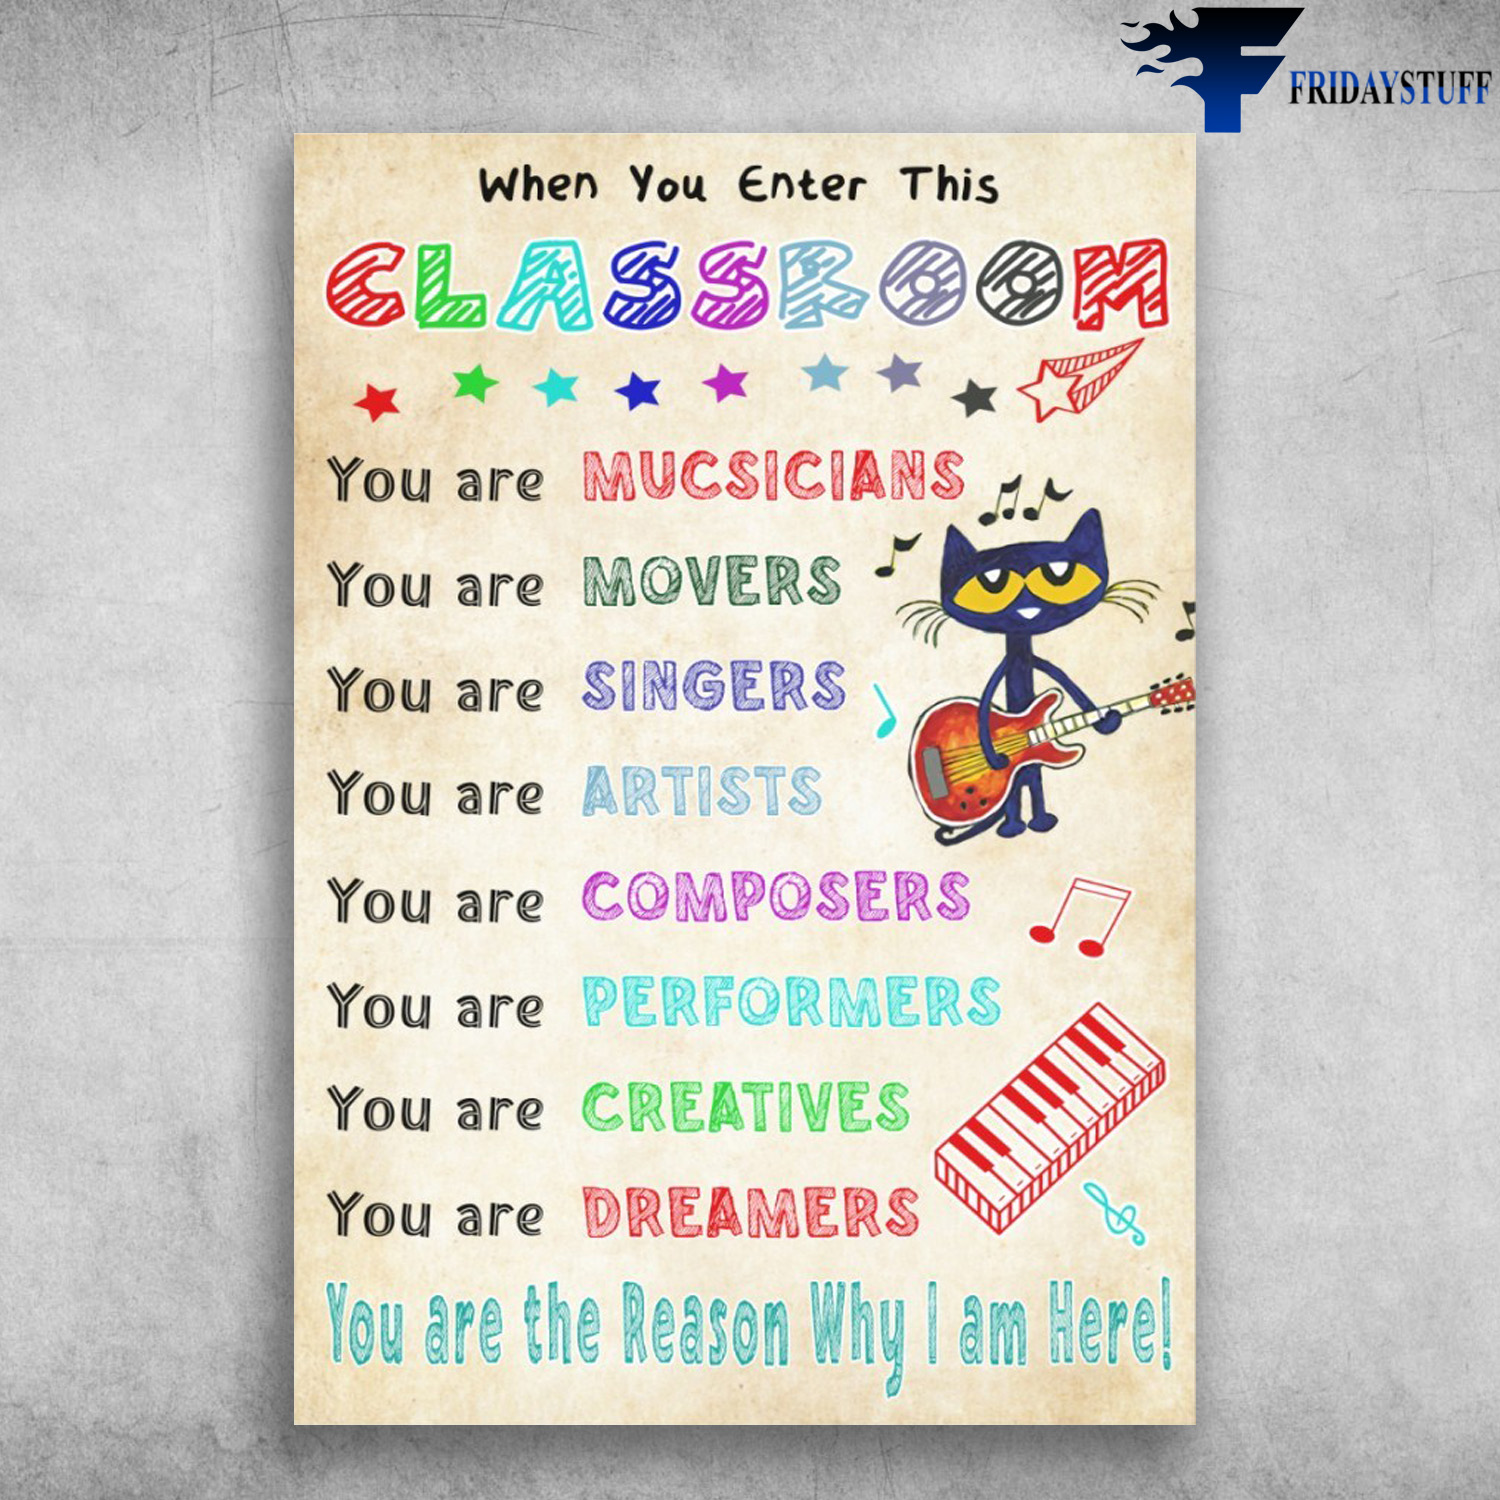 Classroom Rules - When You Enter This Classroom, You Are Musicans, You Are Movers, You Are Singers, You Are Artists, You Are Composes, You Are Performers, You Are Creatives, You Are Dreamers, You Are The Reason Why I Am Here